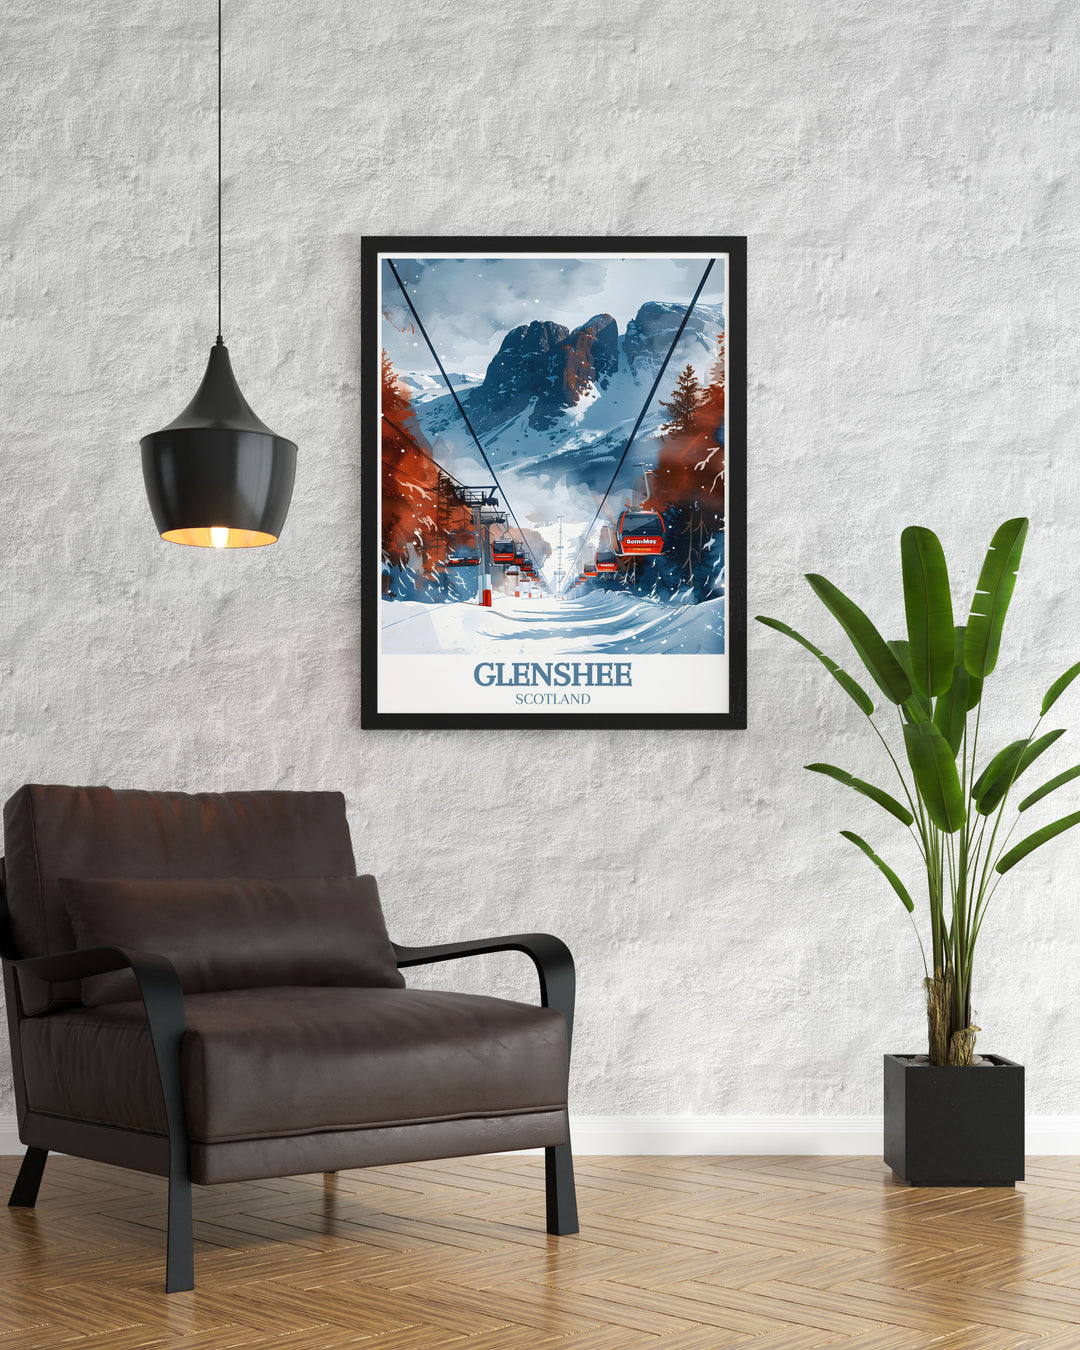 This vibrant travel poster showcases the excitement of Glenshee Ski Resort, highlighting its extensive network of ski runs and modern facilities. Perfect for winter sports enthusiasts, this artwork captures the dynamic energy of Scotlands largest ski resort.